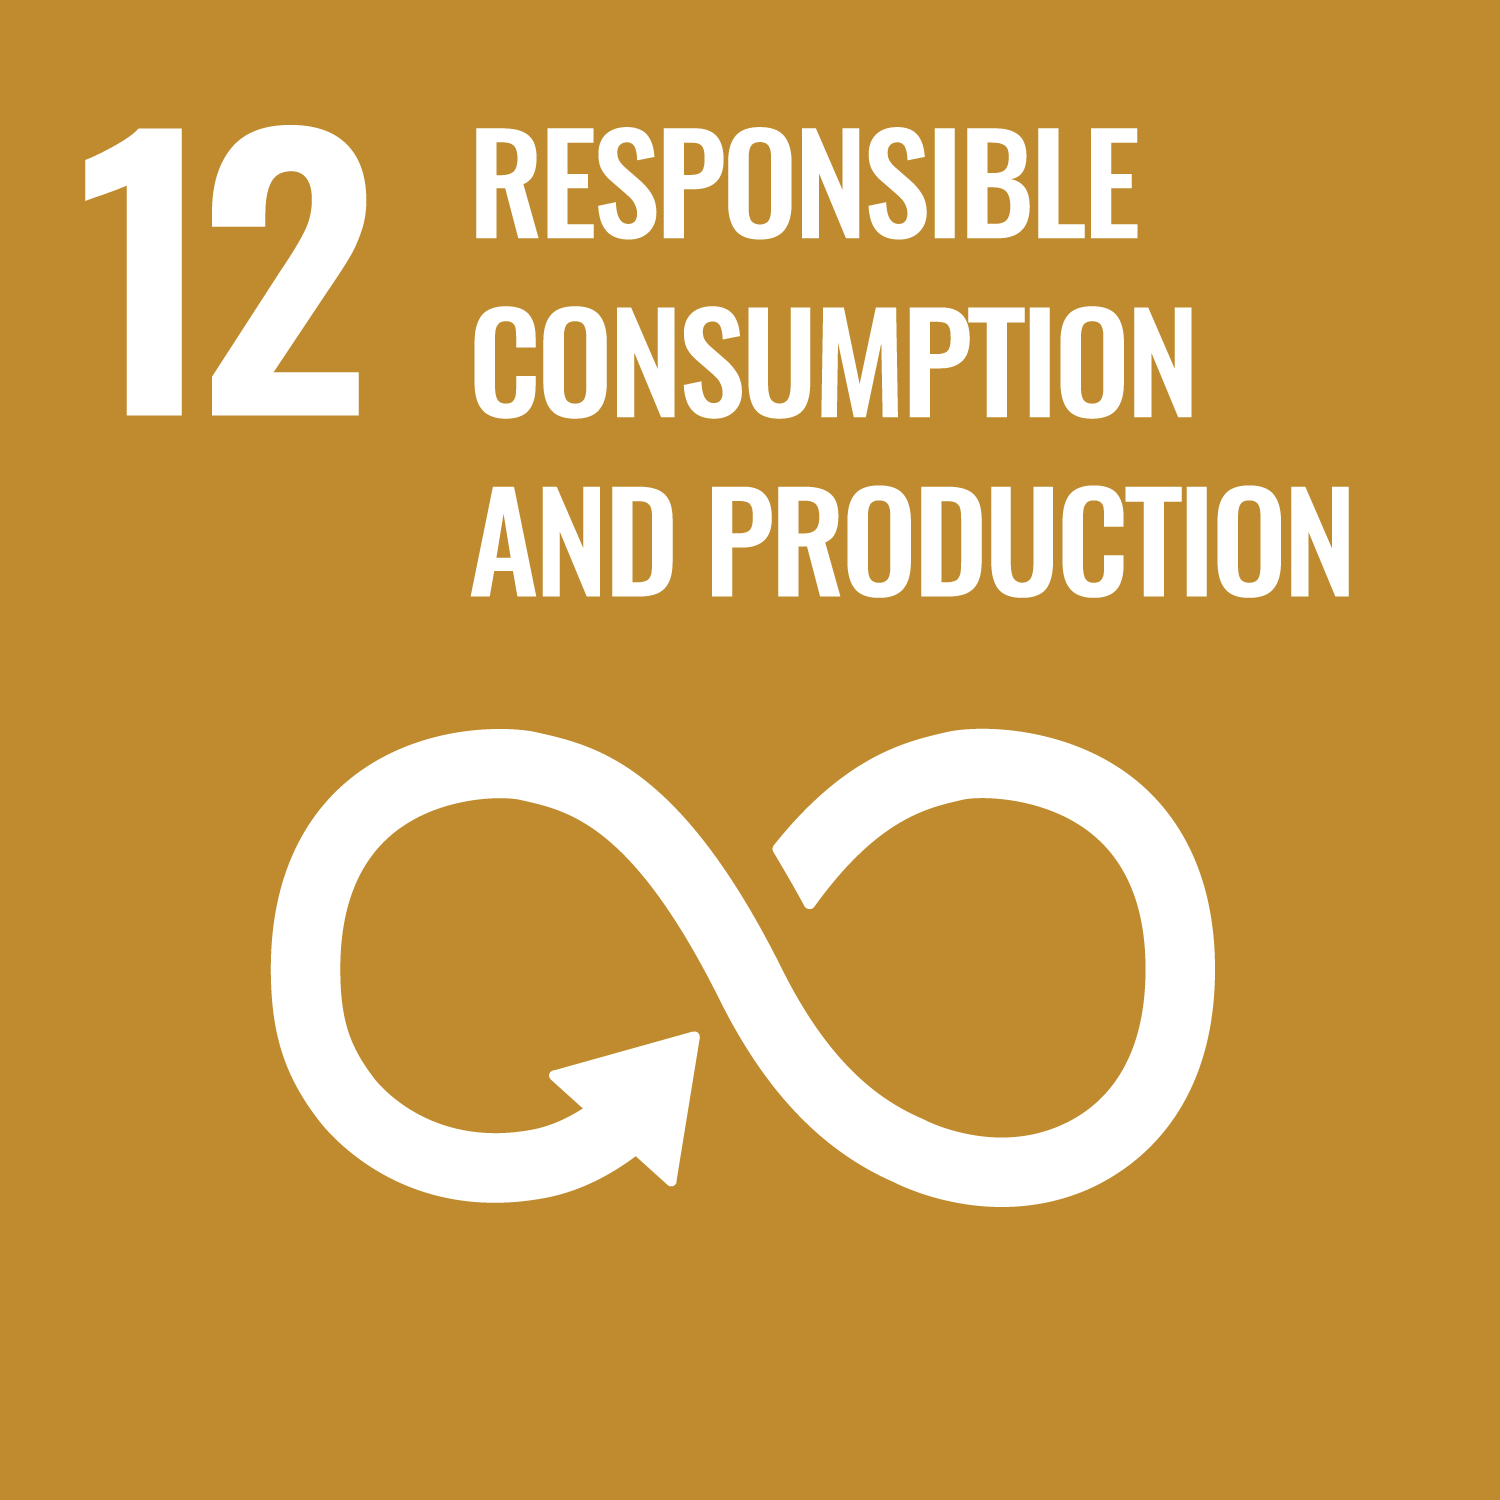 On a gold background, white text reads "12. Responsible consumption and production". Beneath this is an illustration of an infinity symbol.